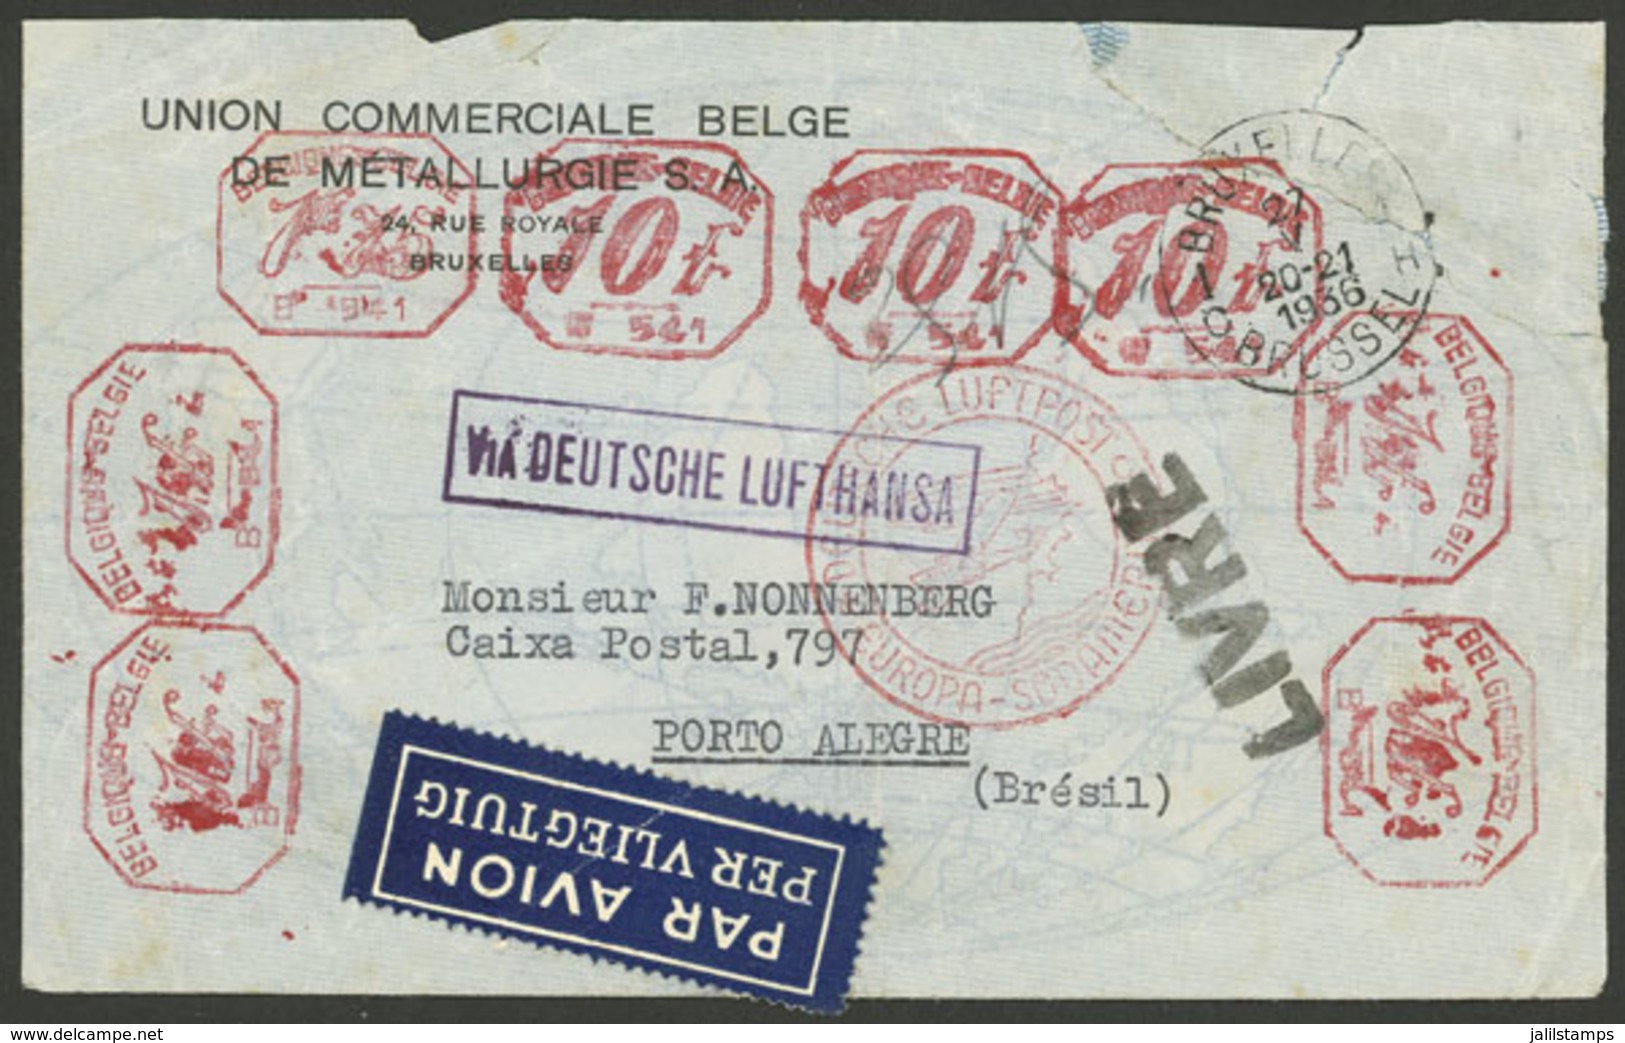 BELGIUM: 27/JUL/1936 Bruxelles - Brazil, Airmail Cover Flown By German DLH With Multiple Meter Stamps (35.75Fr.), With R - Briefe U. Dokumente